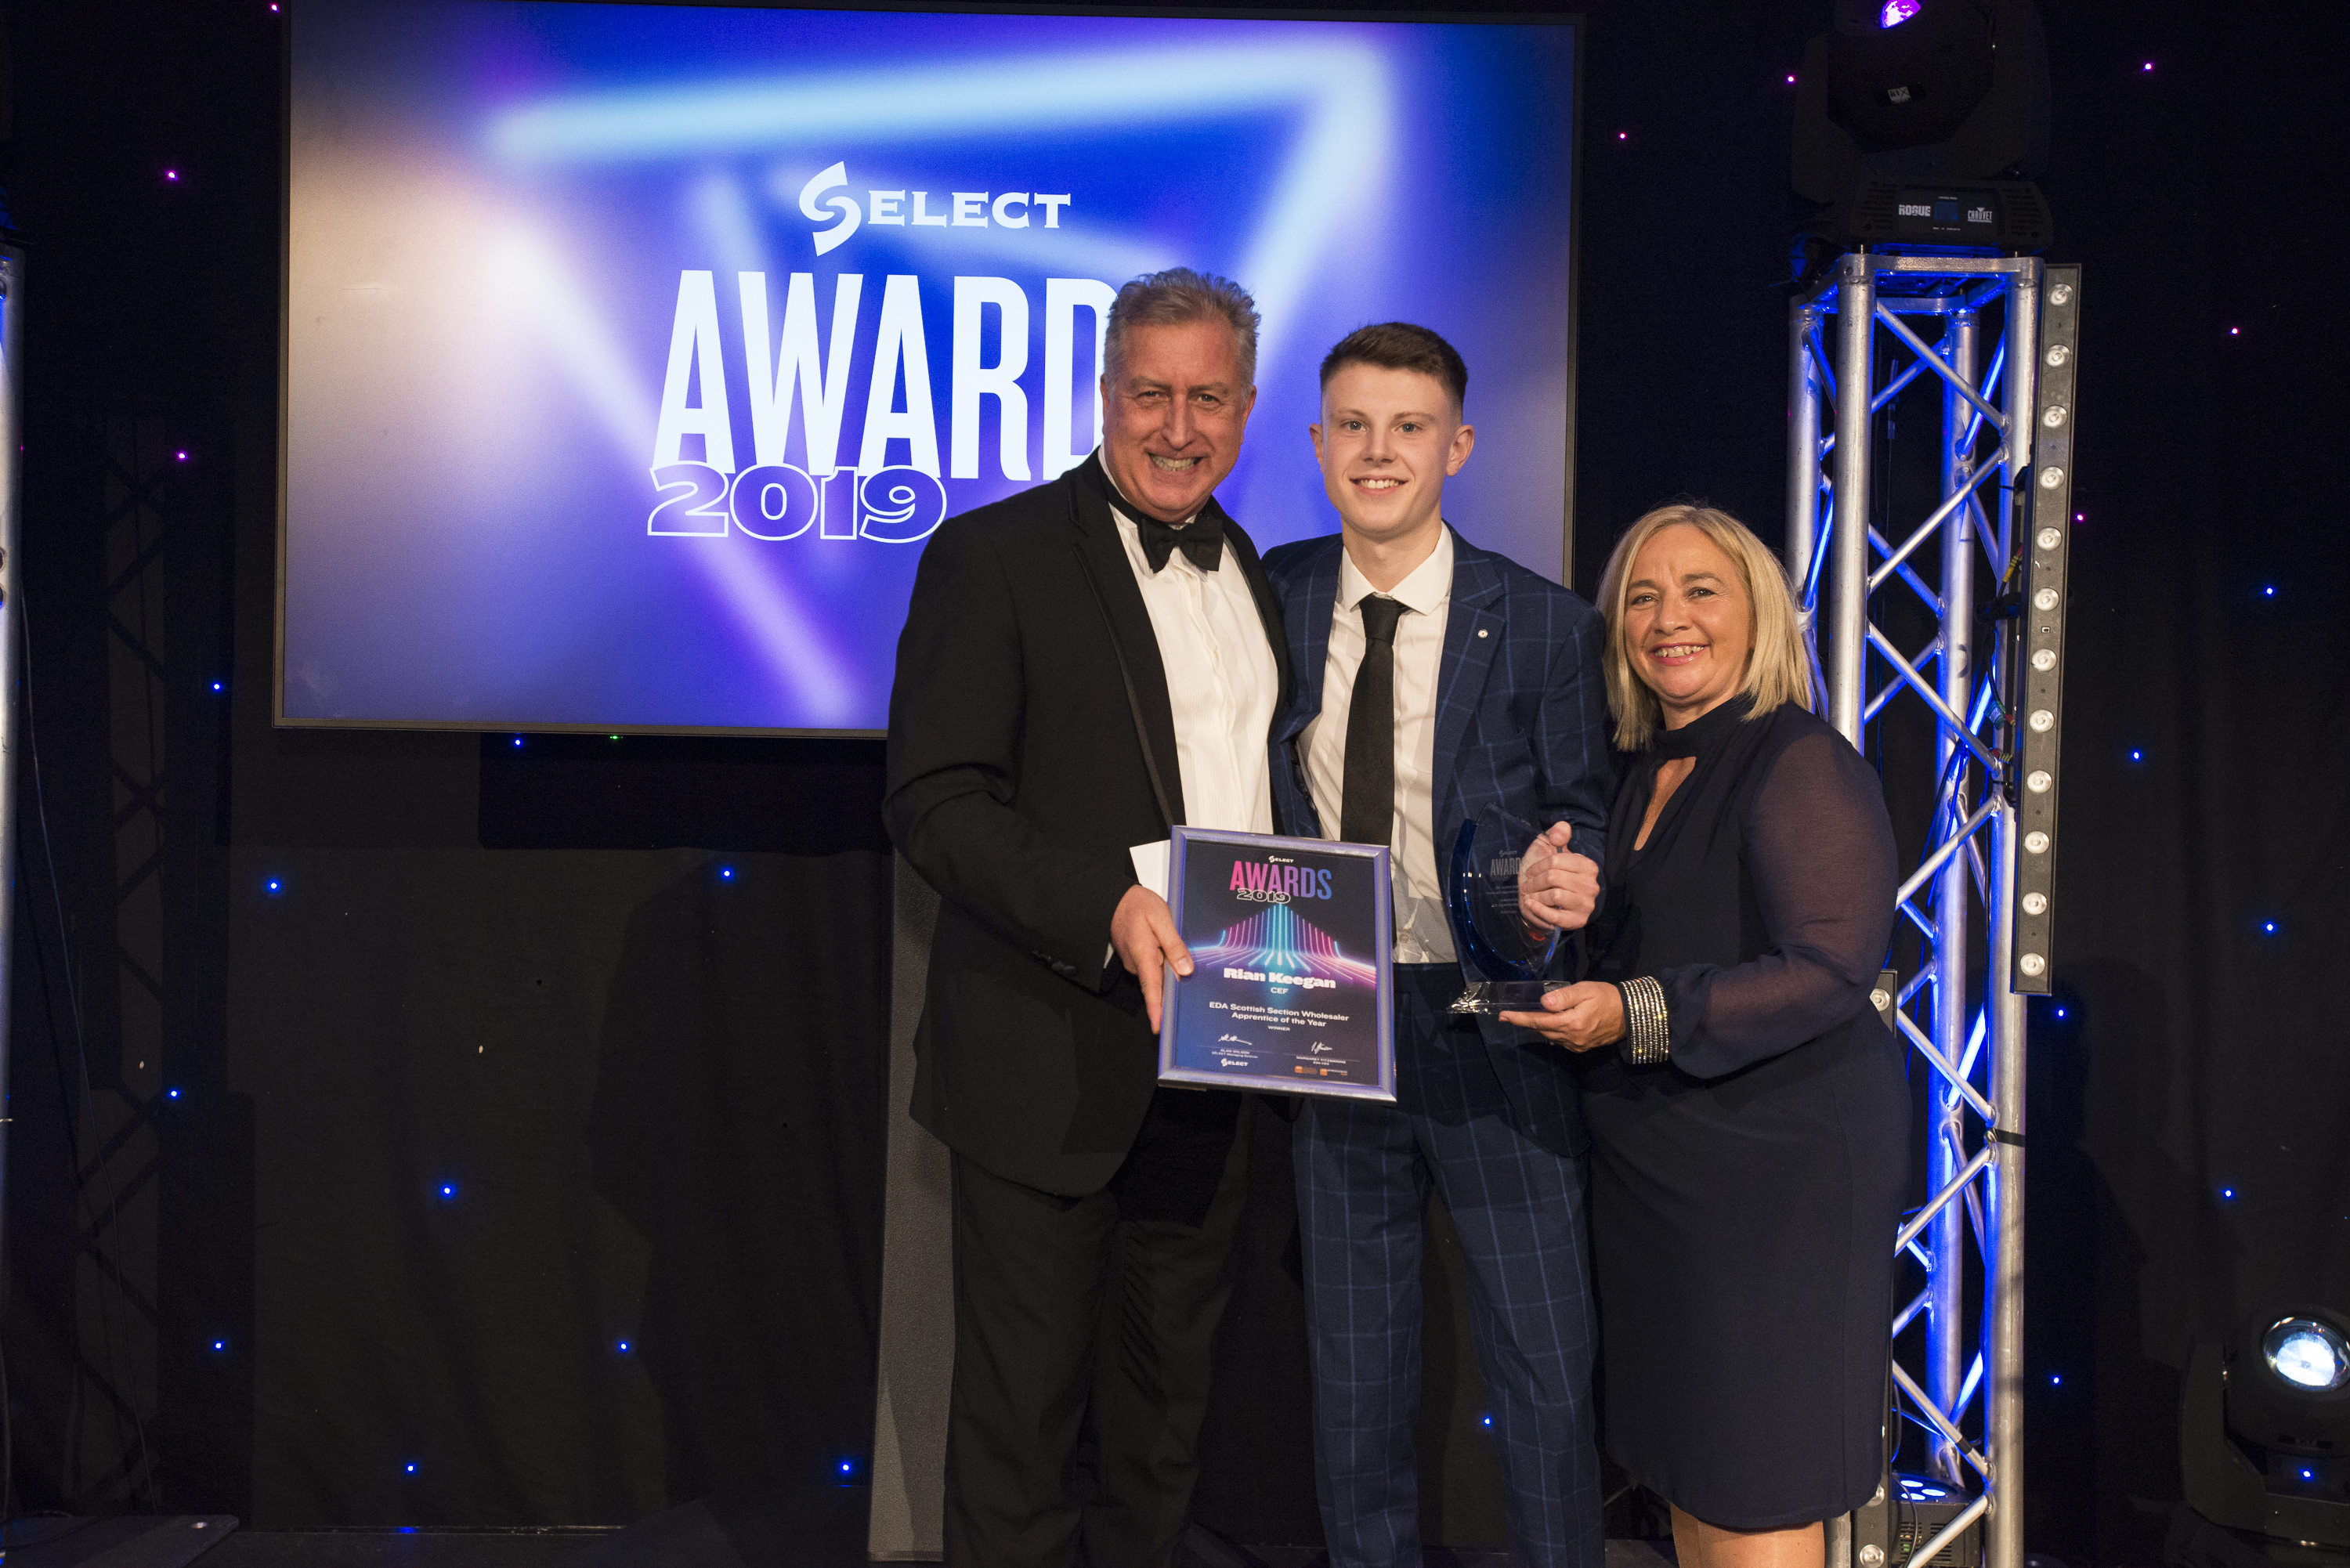 Worthy winners recognised at 2019 SELECT Awards ceremony